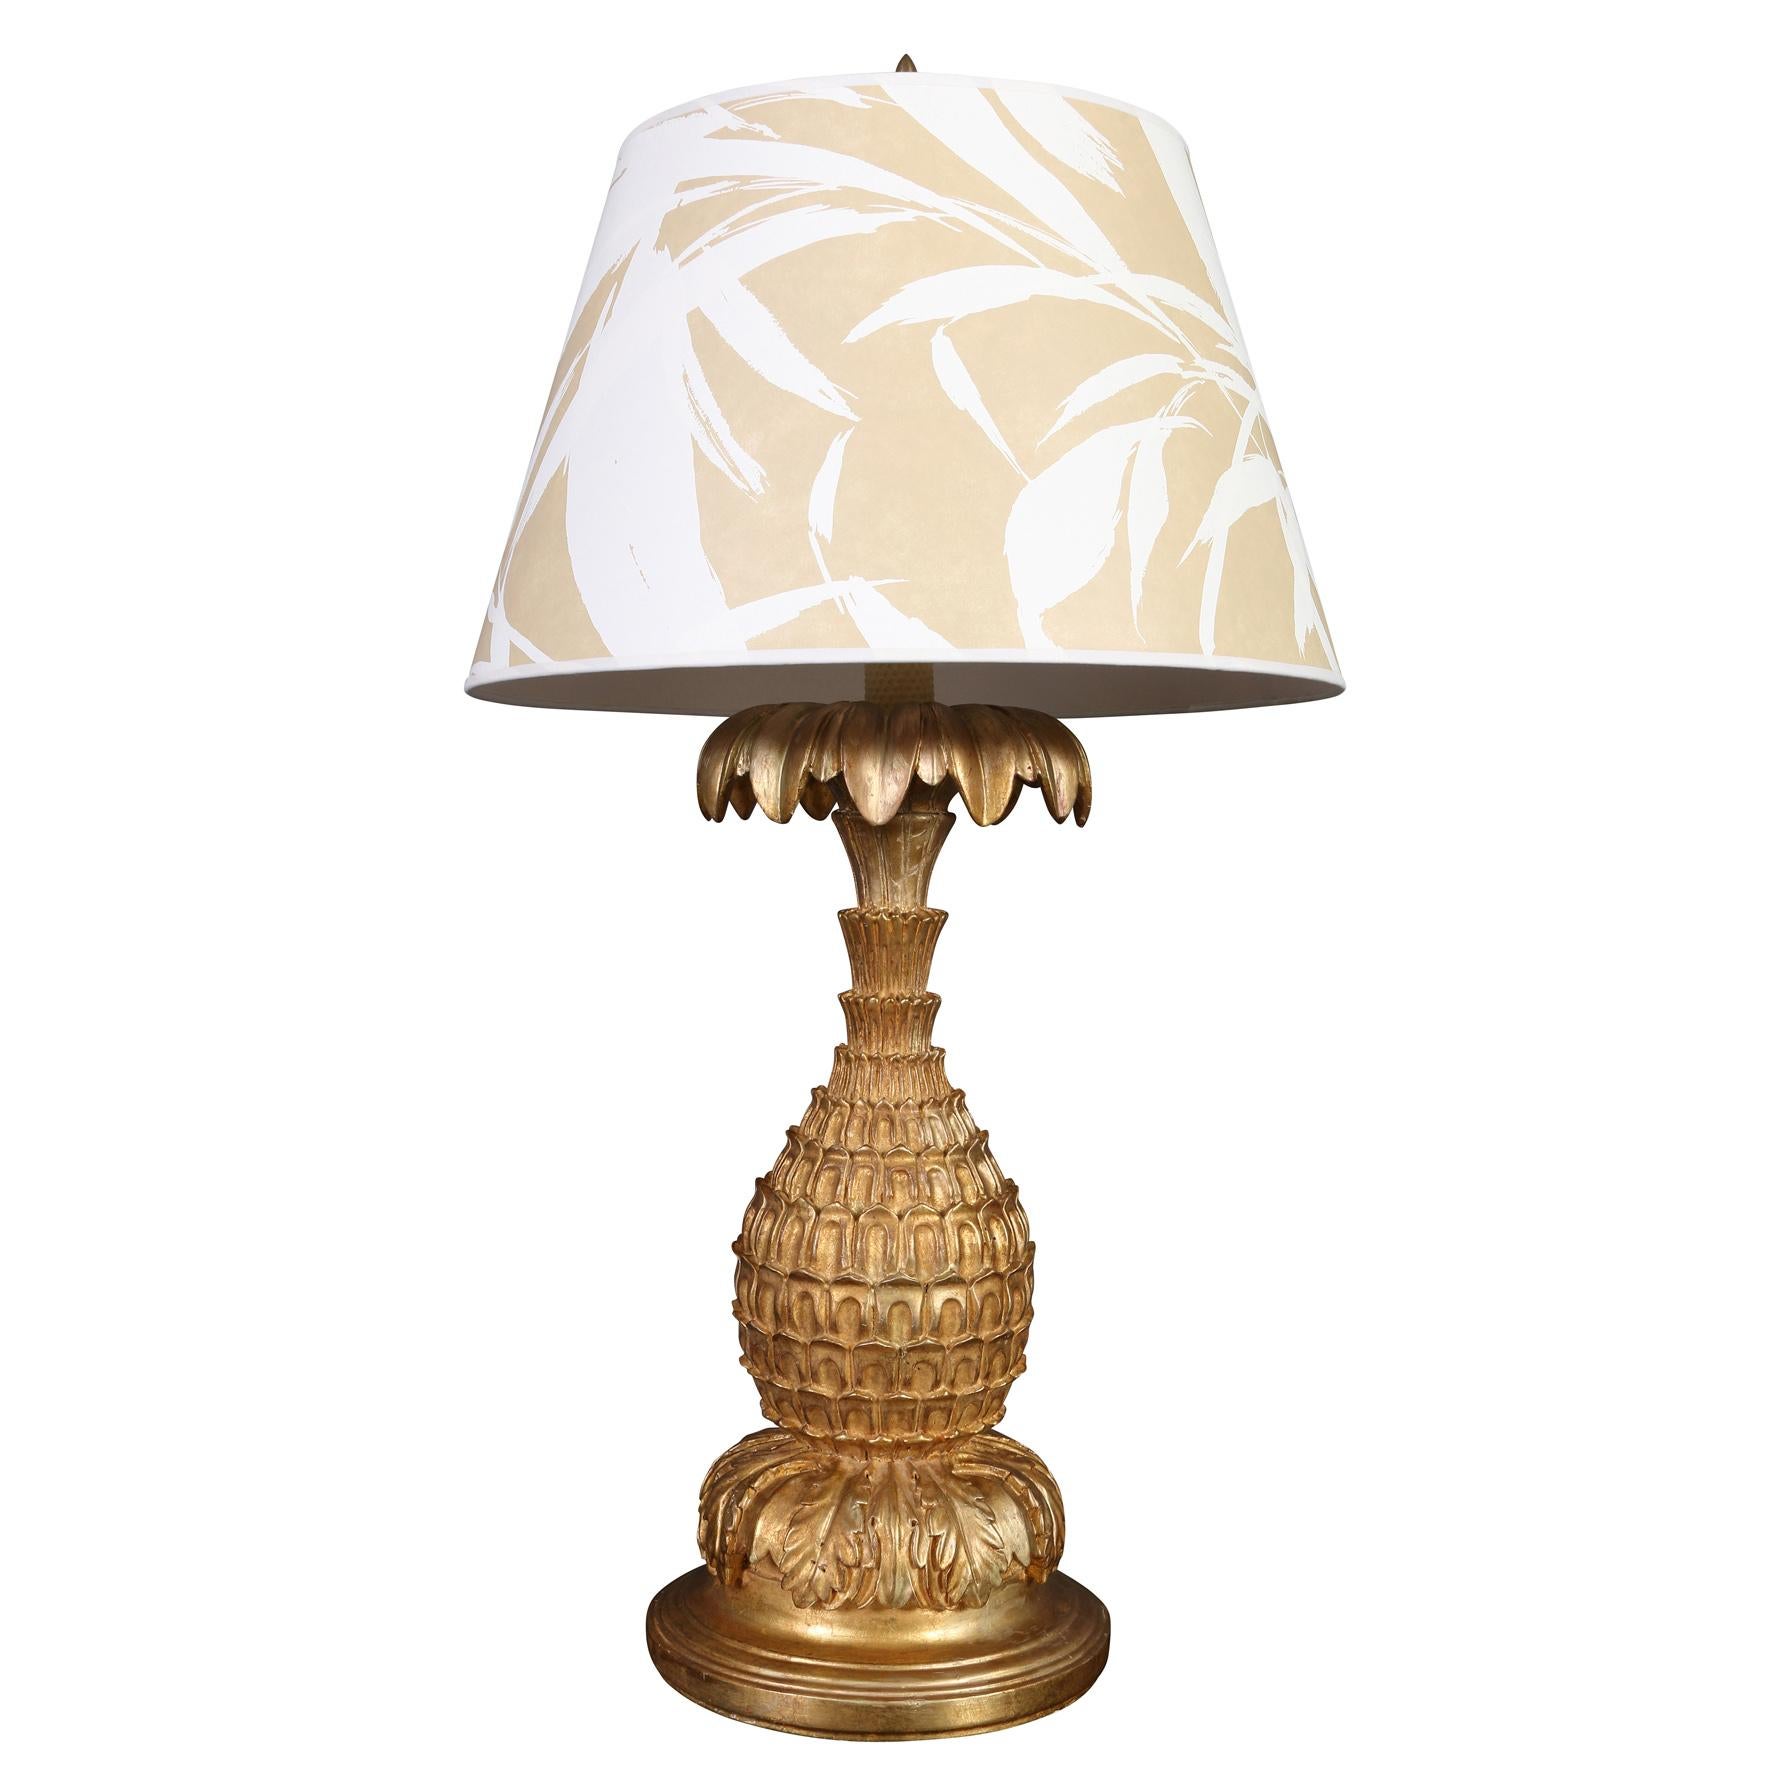 Hollywood Regency Monumental Serge Roche Style Gilt Gesso Pineapple Lamp For Sale